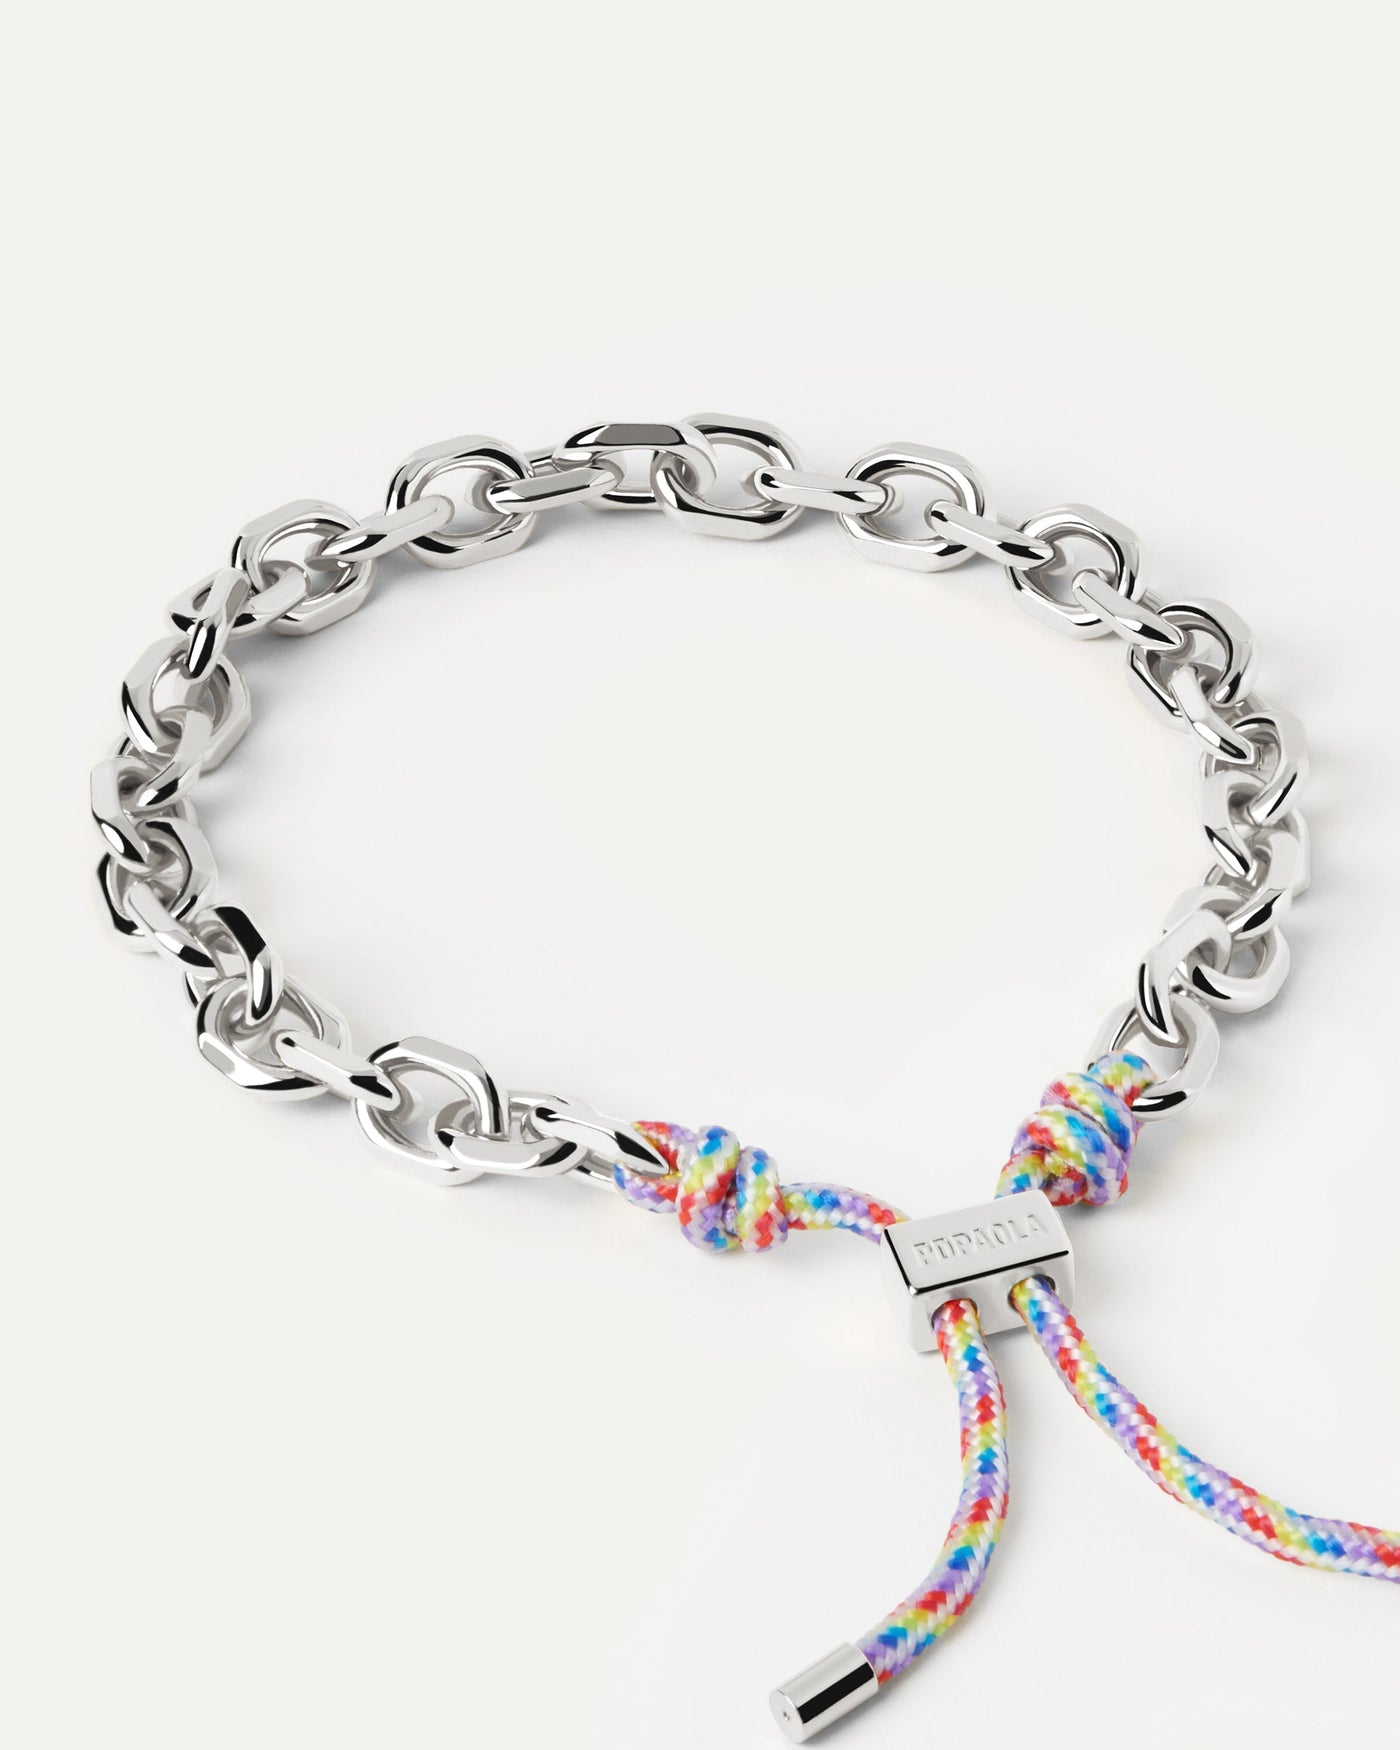 2023 Selection | Prisma Essential Rope and Chain Silver Bracelet. Silver chain bracelet with a navy blue rope adjustable sliding clasp. Get the latest arrival from PDPAOLA. Place your order safely and get this Best Seller. Free Shipping.